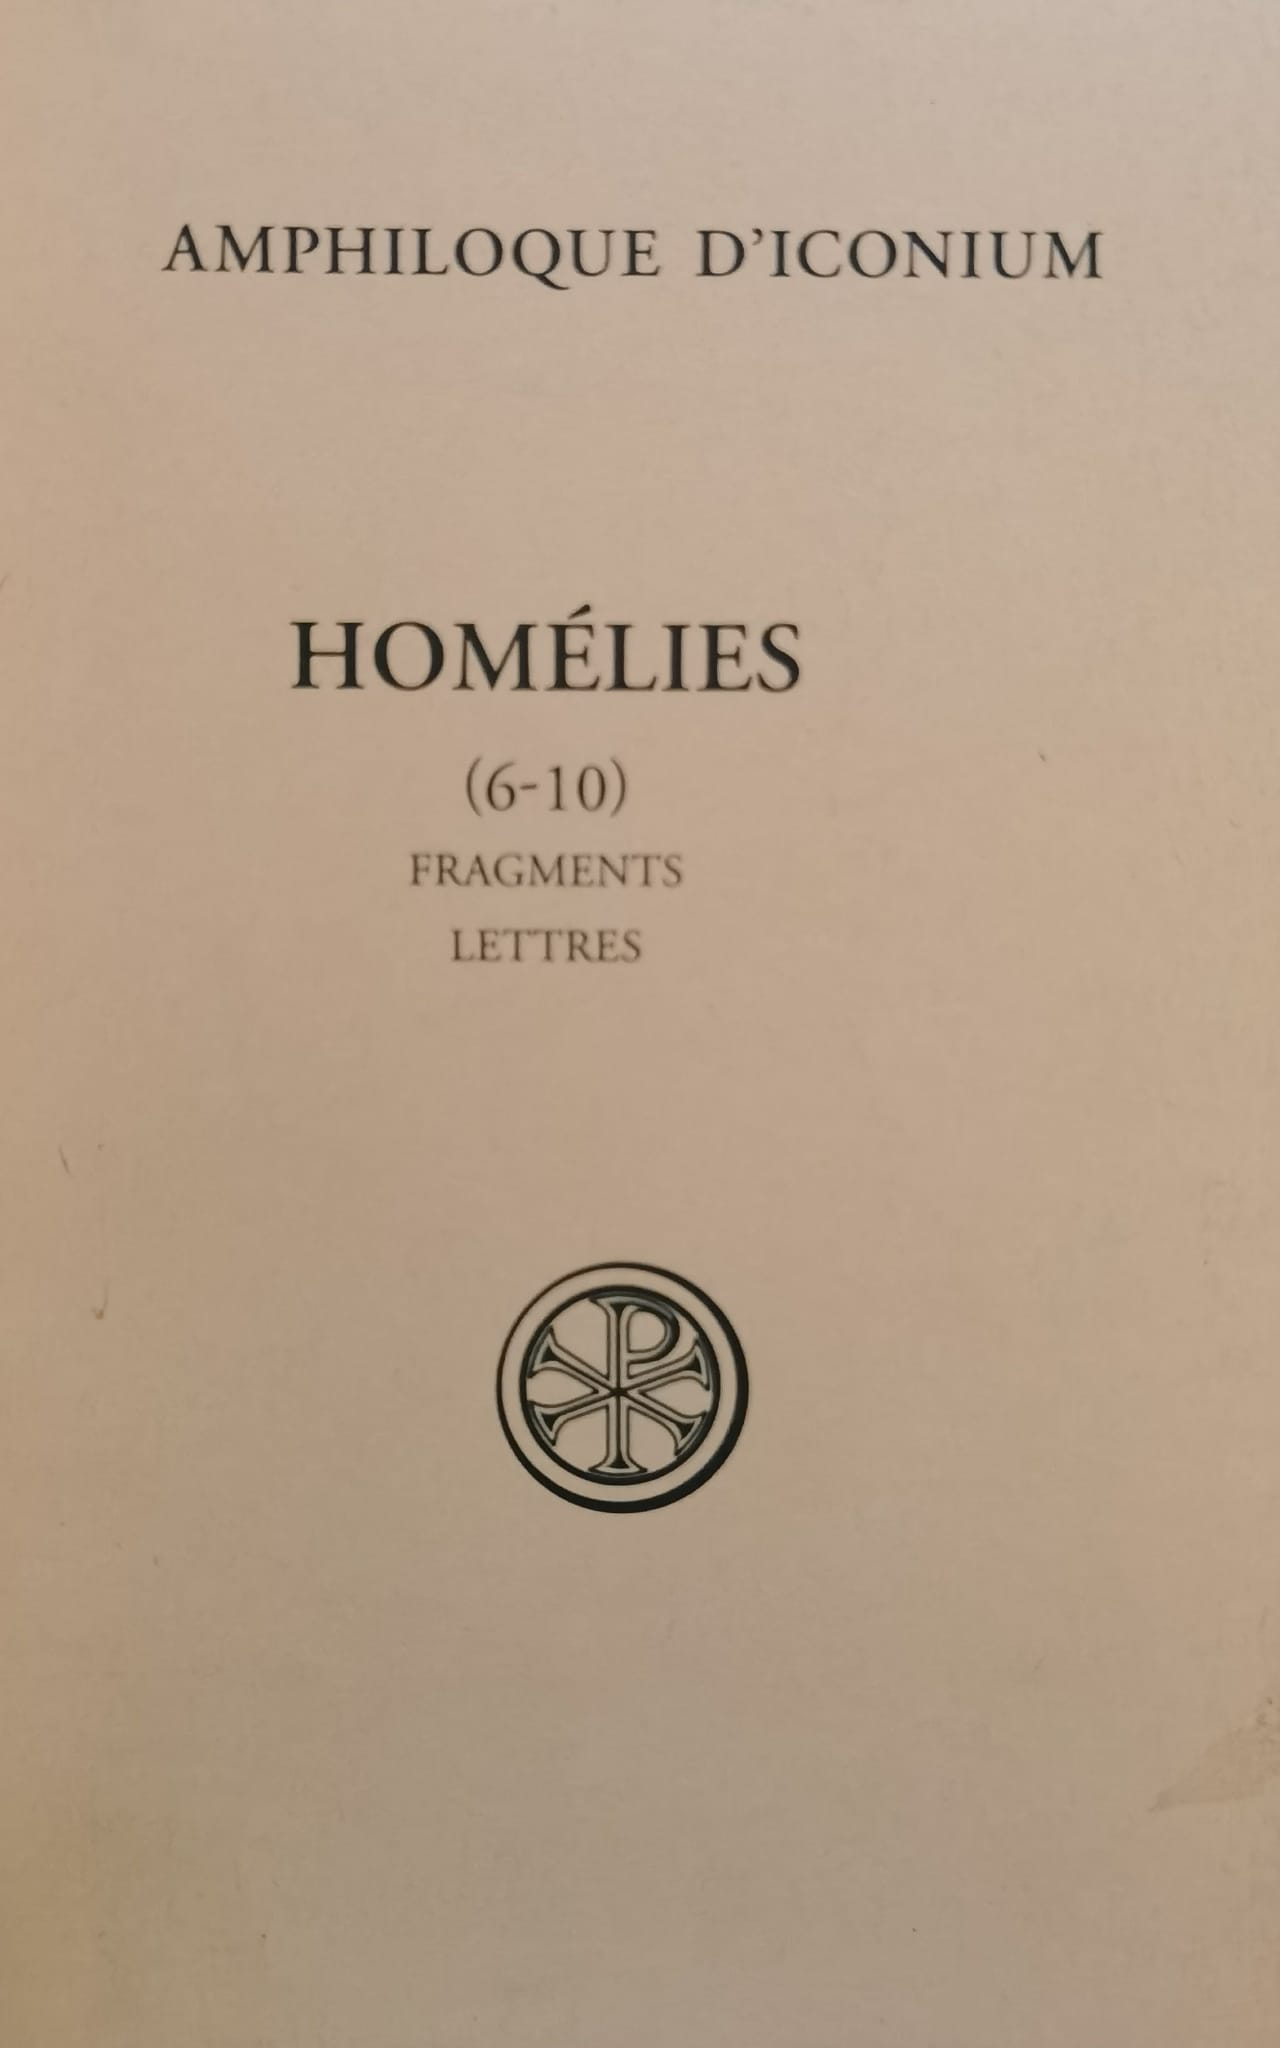 HOMELIES (6-10) FRAGMENTS LETTRES                                                         ...